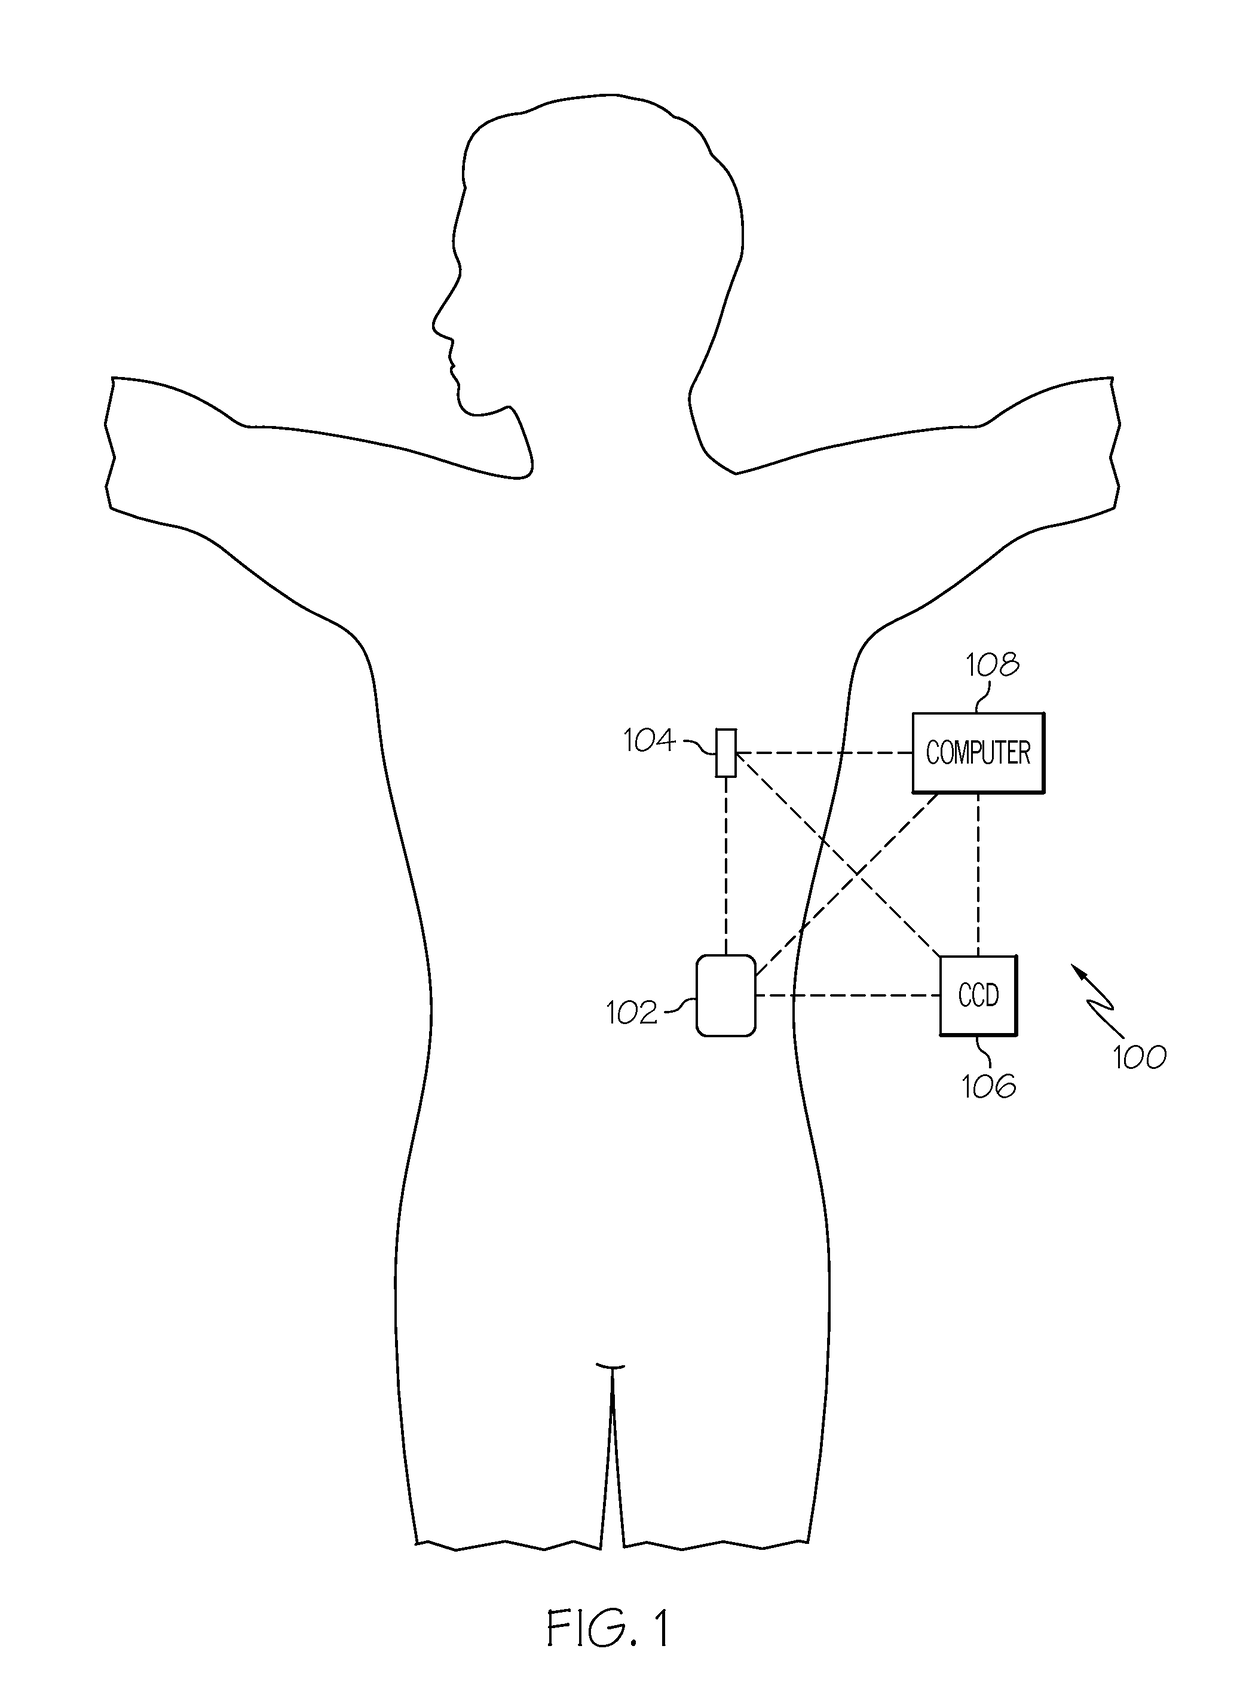 Advance diagnosis of infusion device operating mode viability